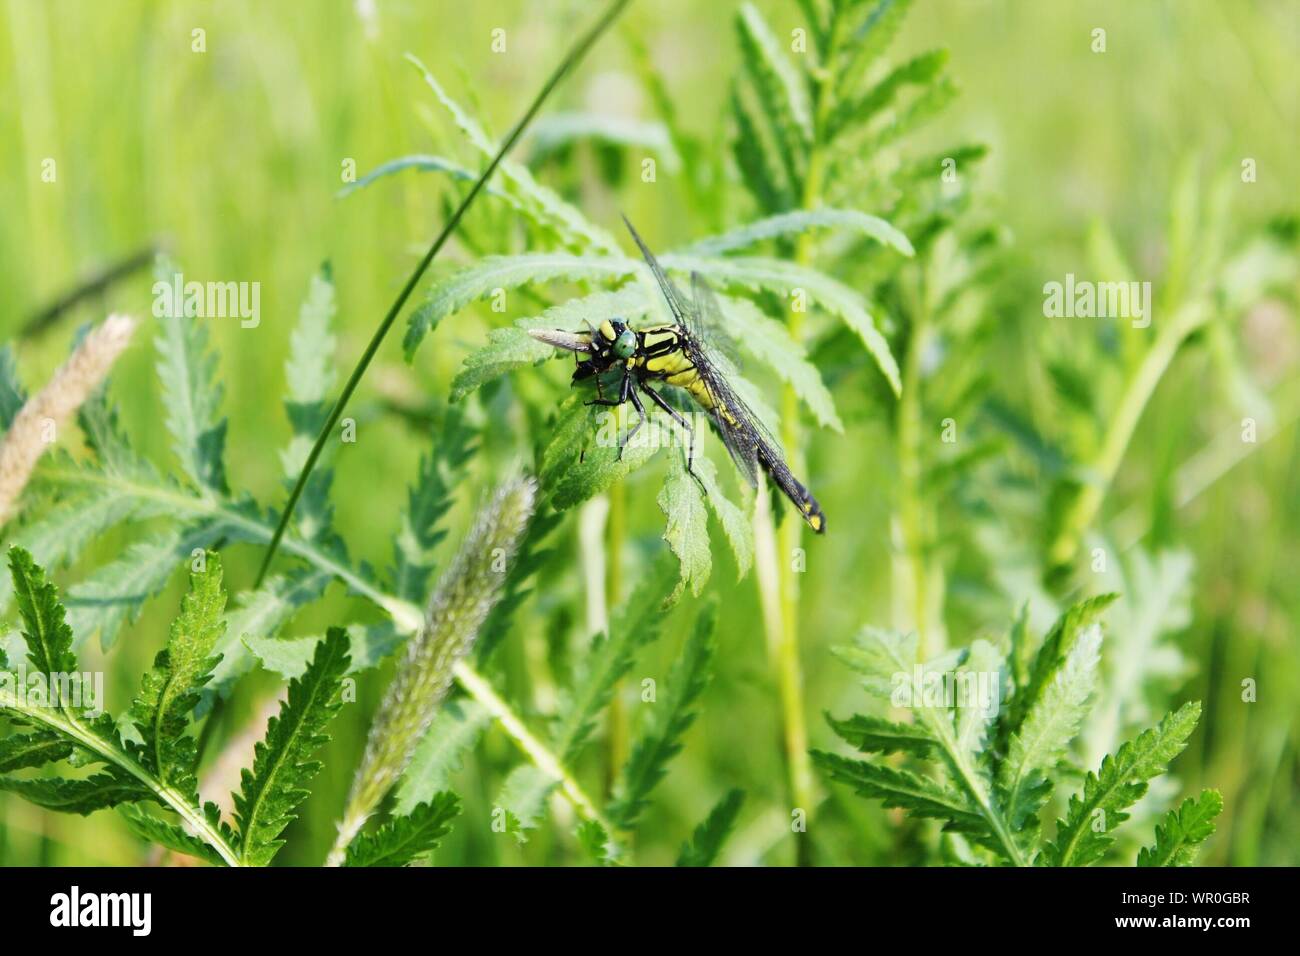 Dragonfly Eating Bug On Plant Stock Photo